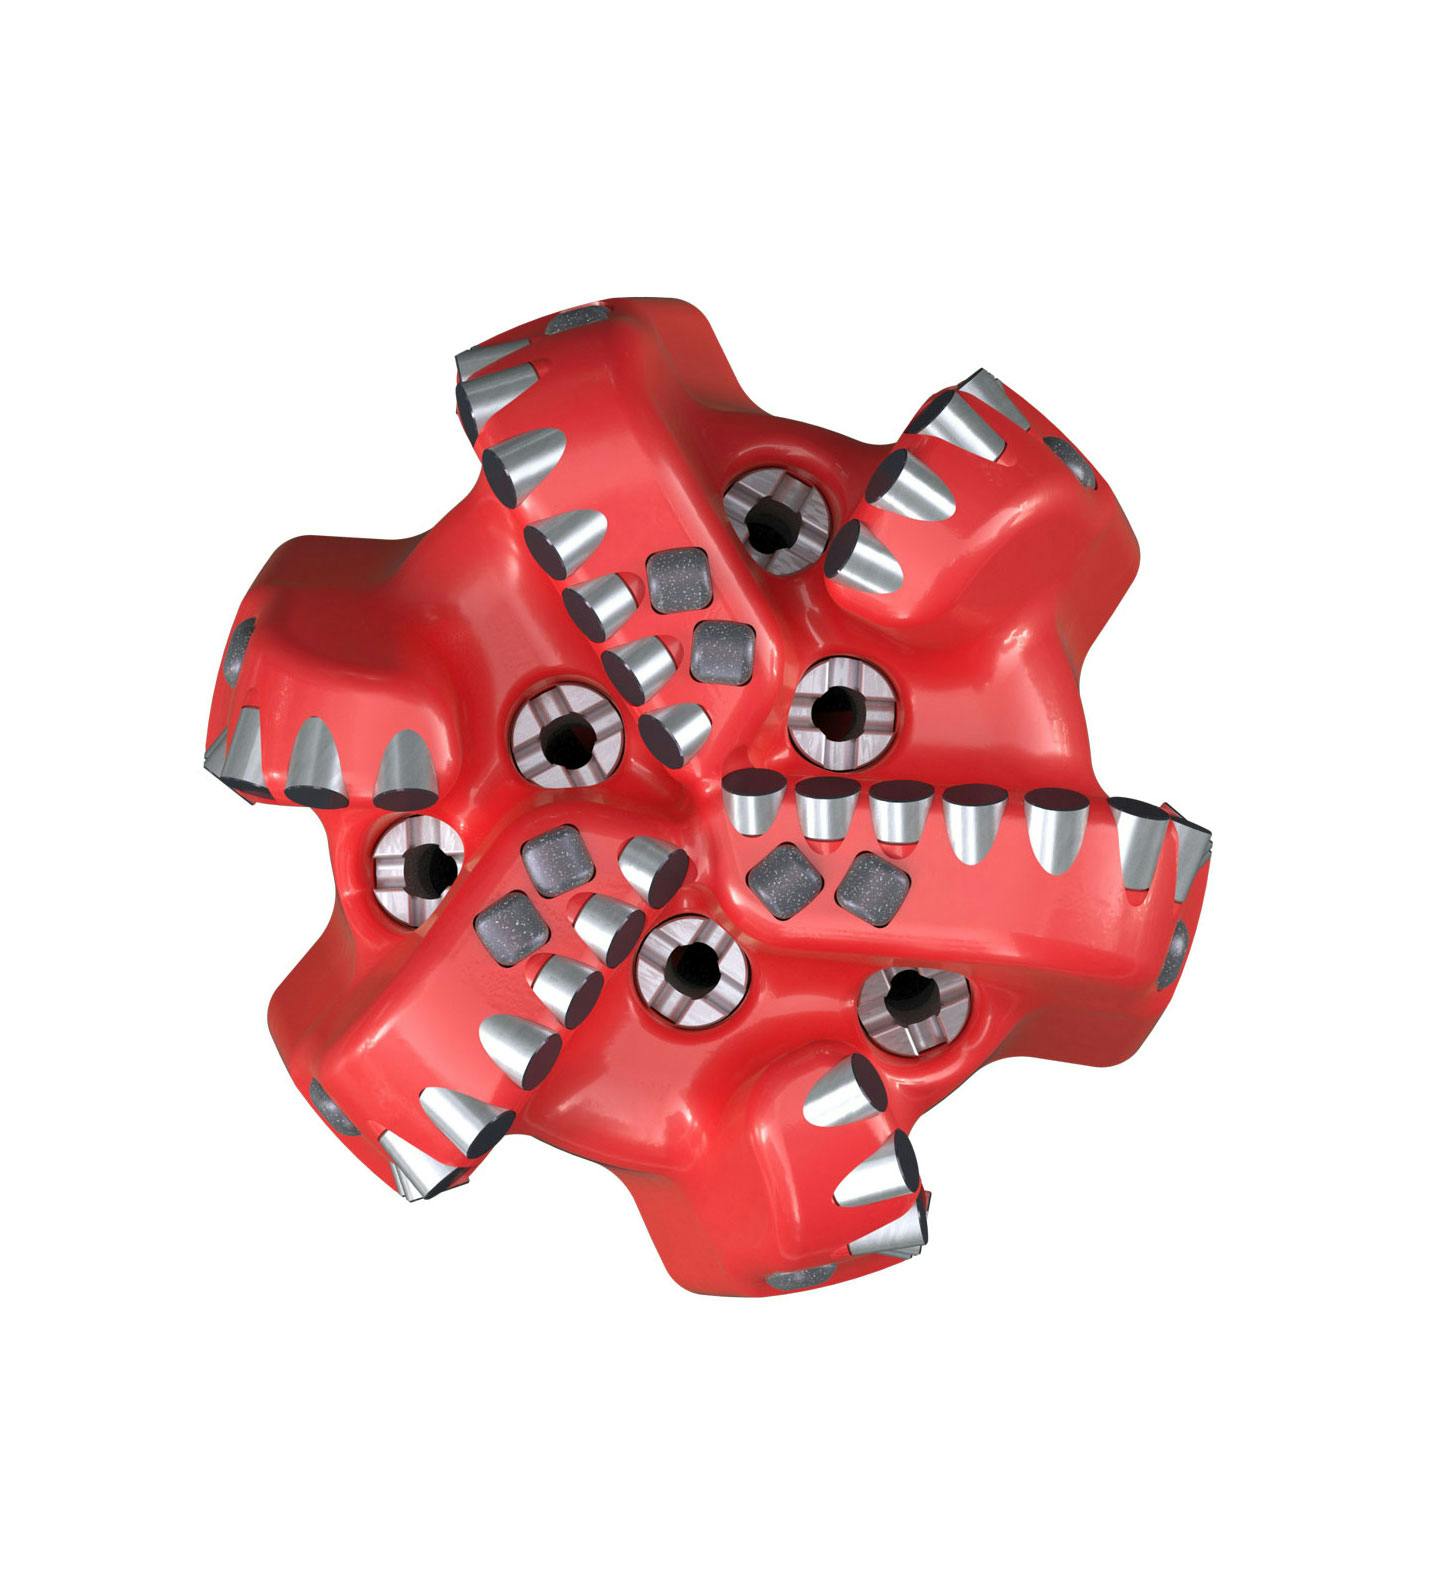 Top render of a red Pursuit drill bit